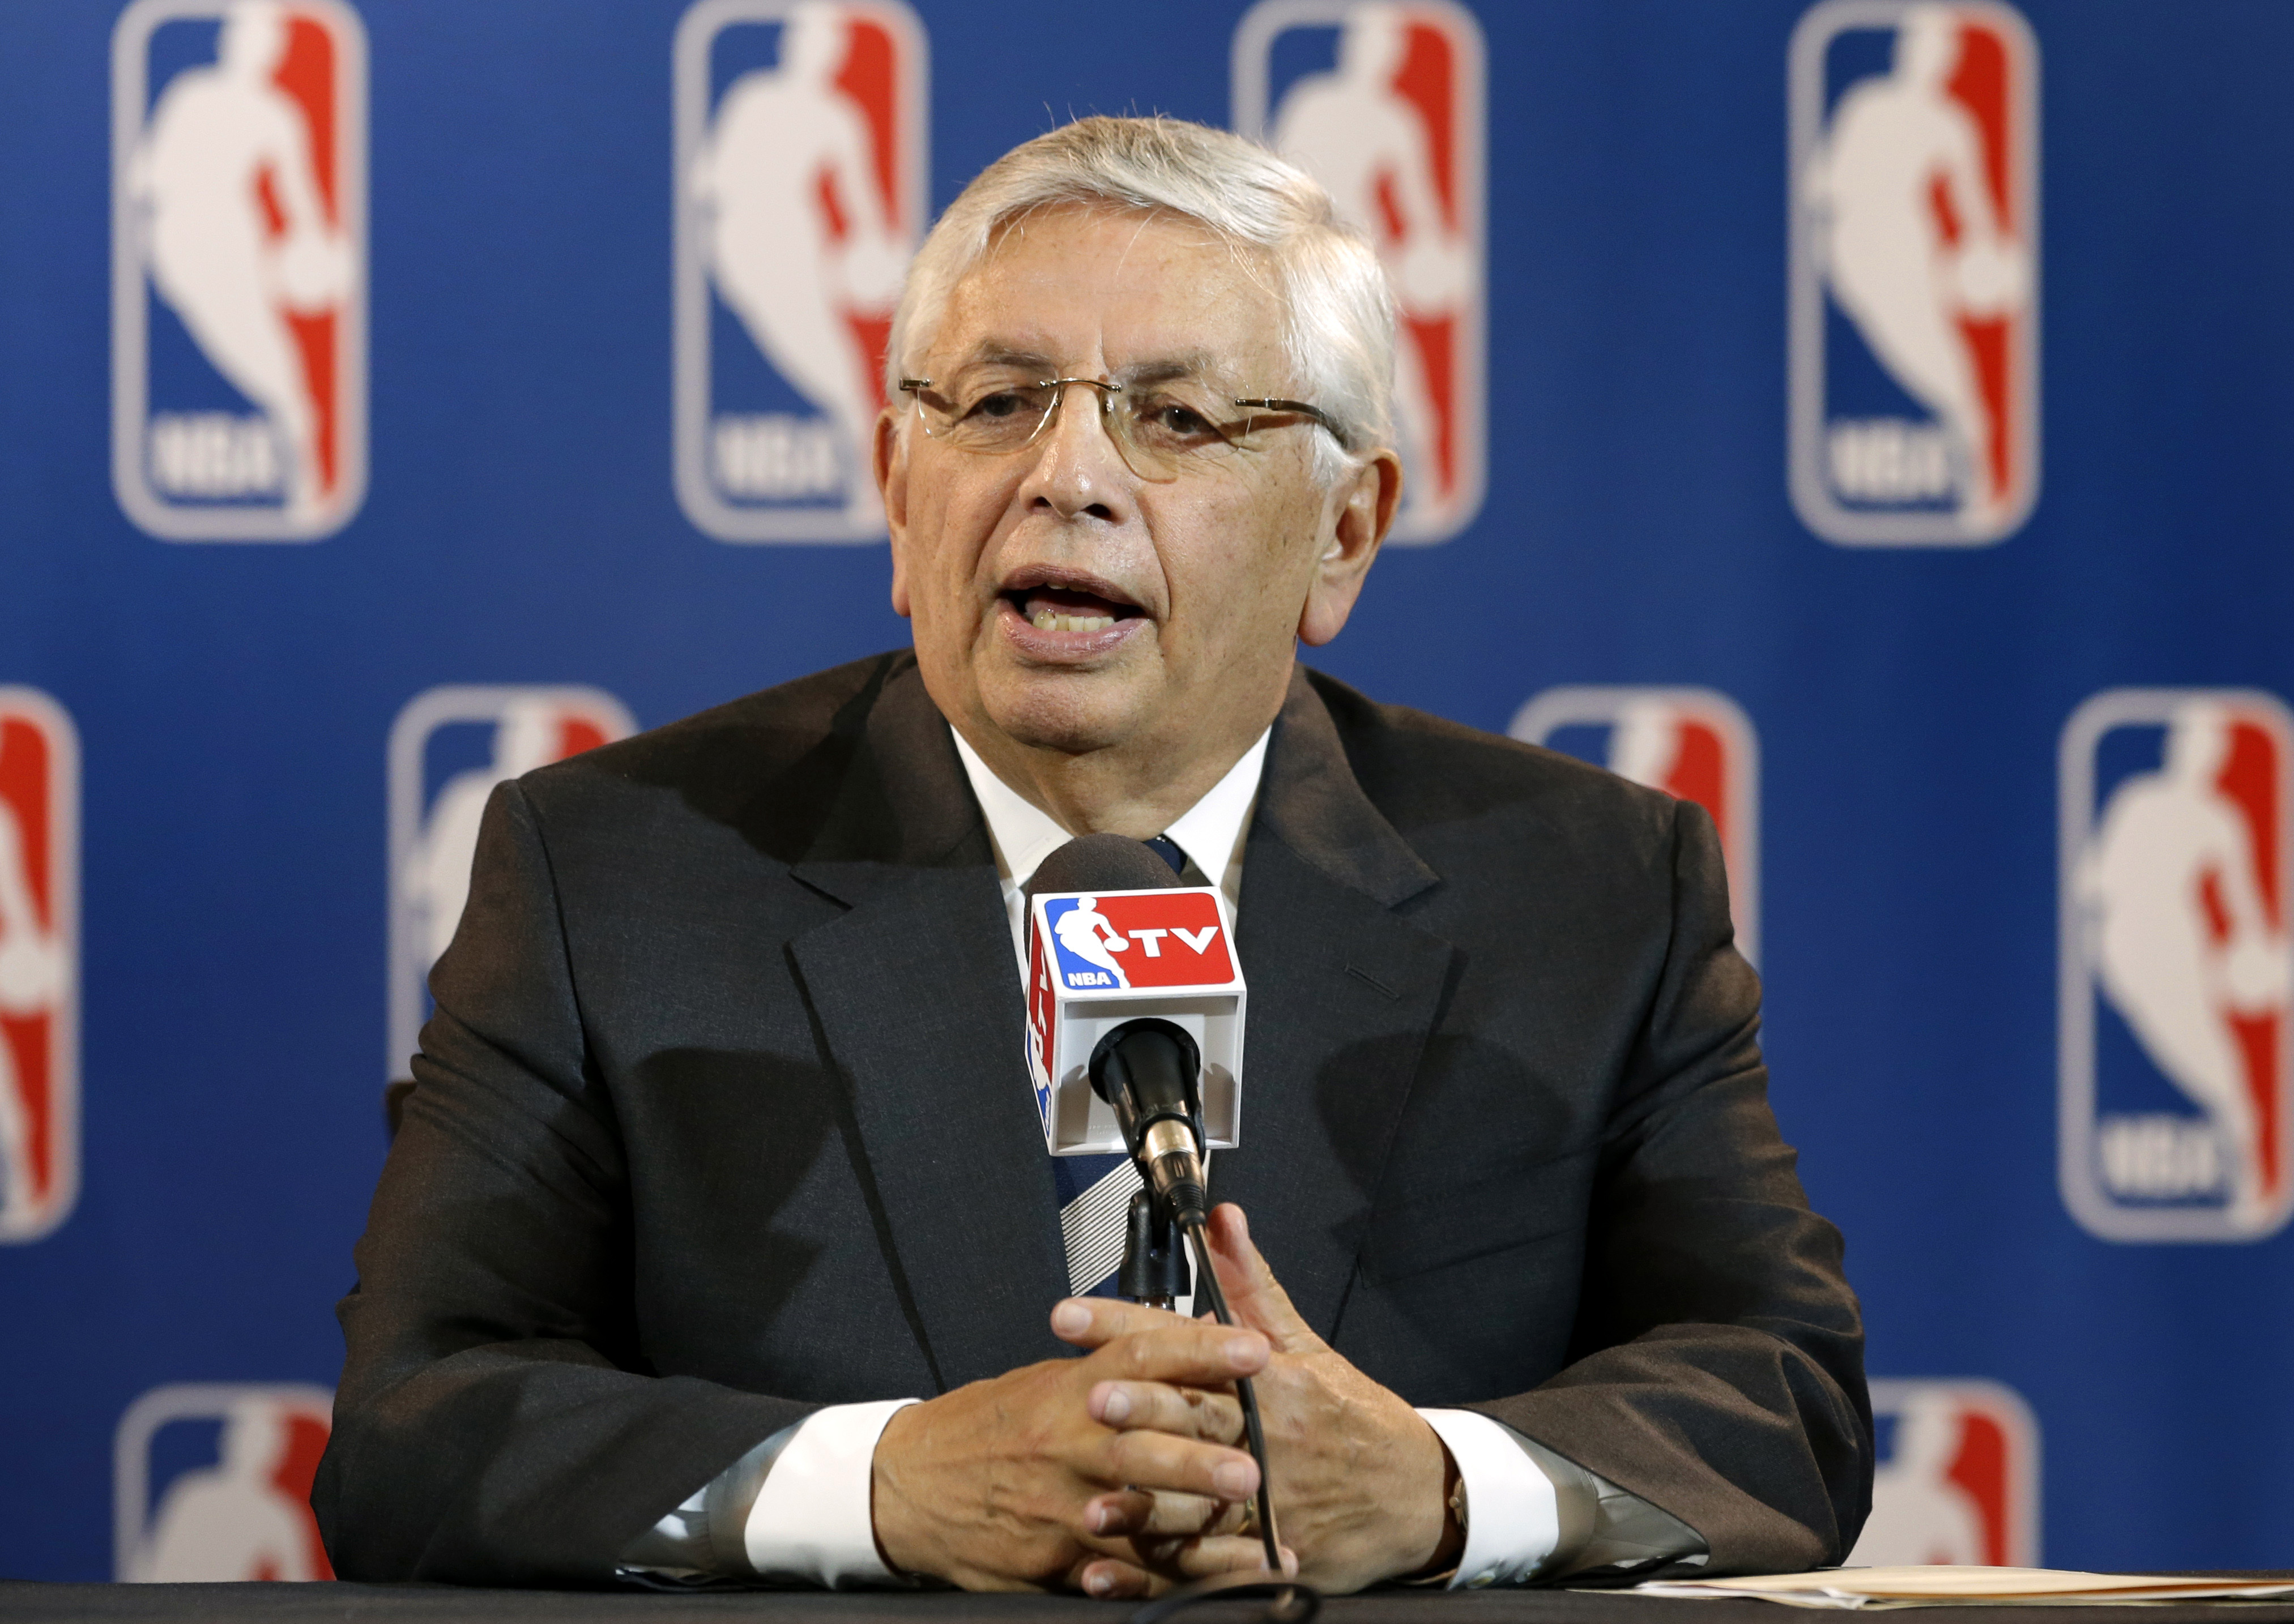 Sacramento Kings owners reach deal to sell team to local investors